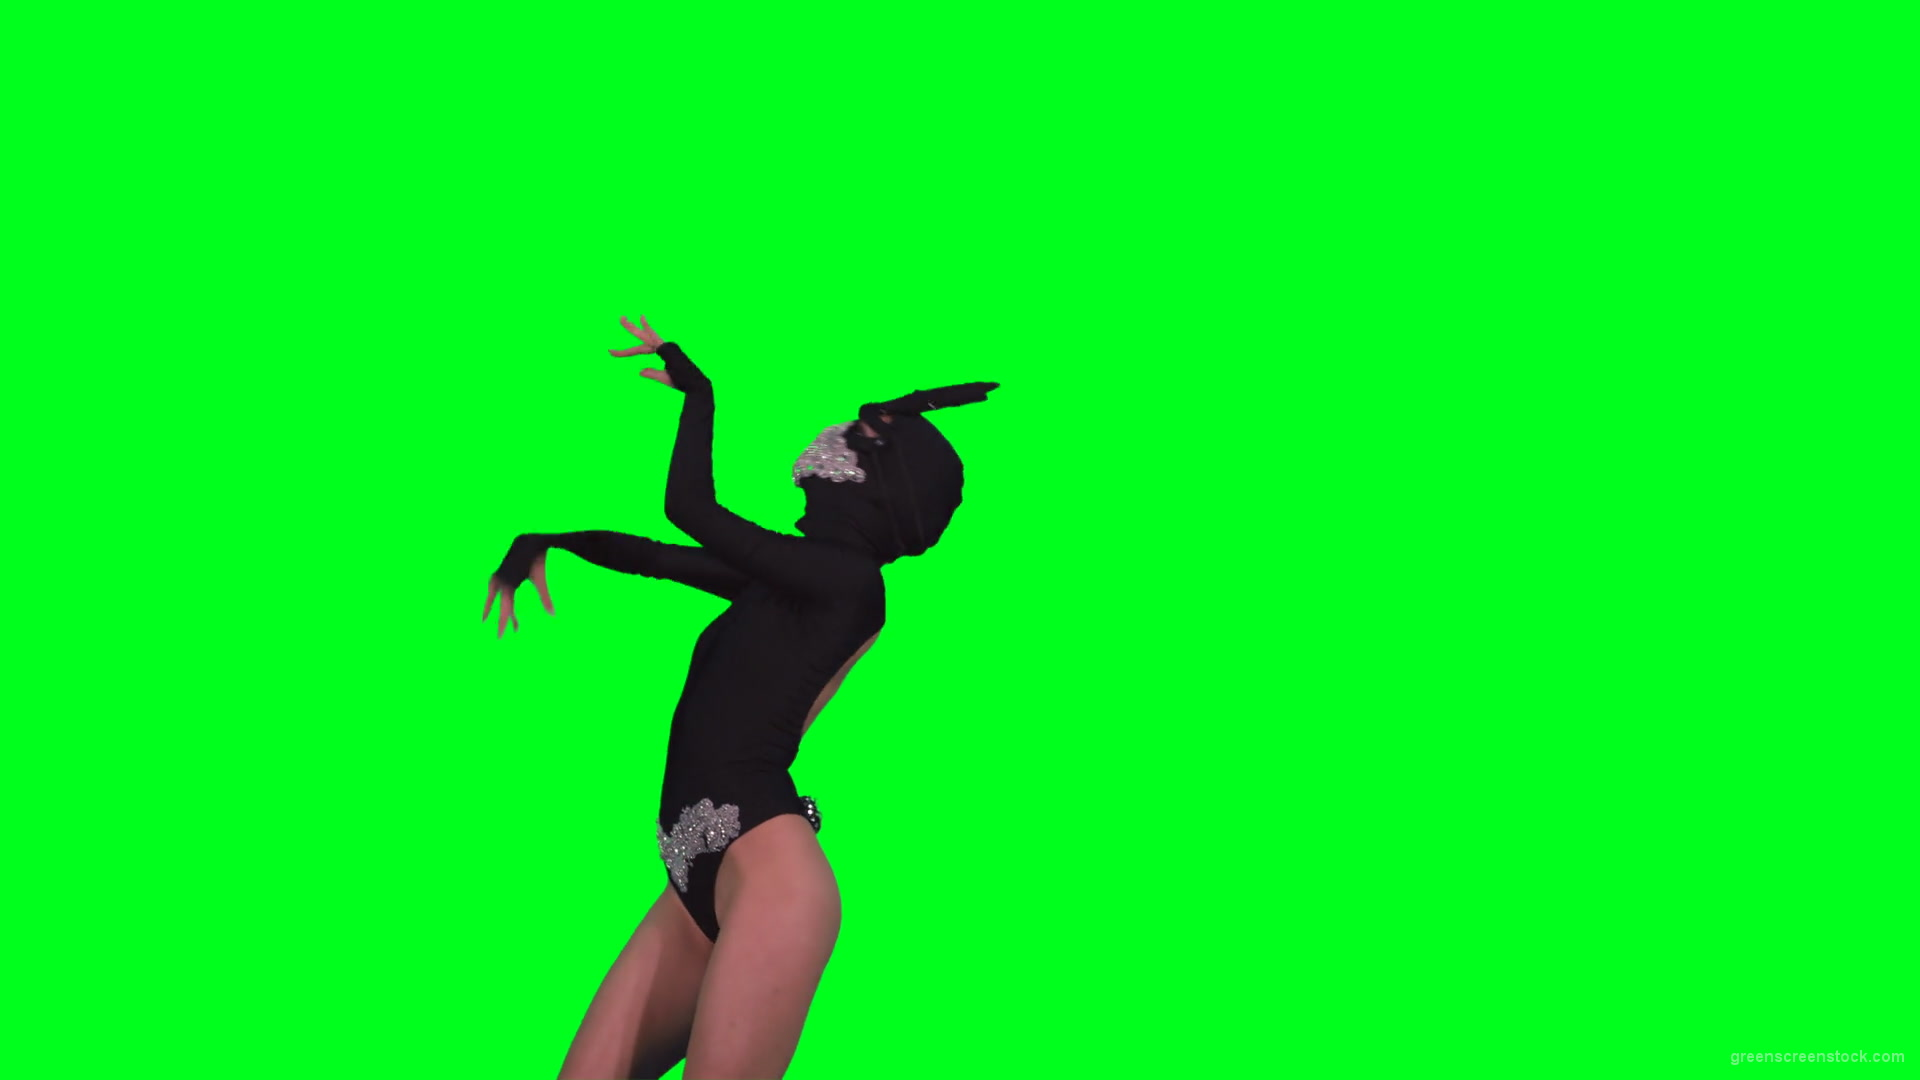 Sexy-Bunny-Girl-in-Rabbit-black-mask-chilling-with-animal-instict-isolated-on-green-screen-4K-Video-Footage-1920_005 Green Screen Stock